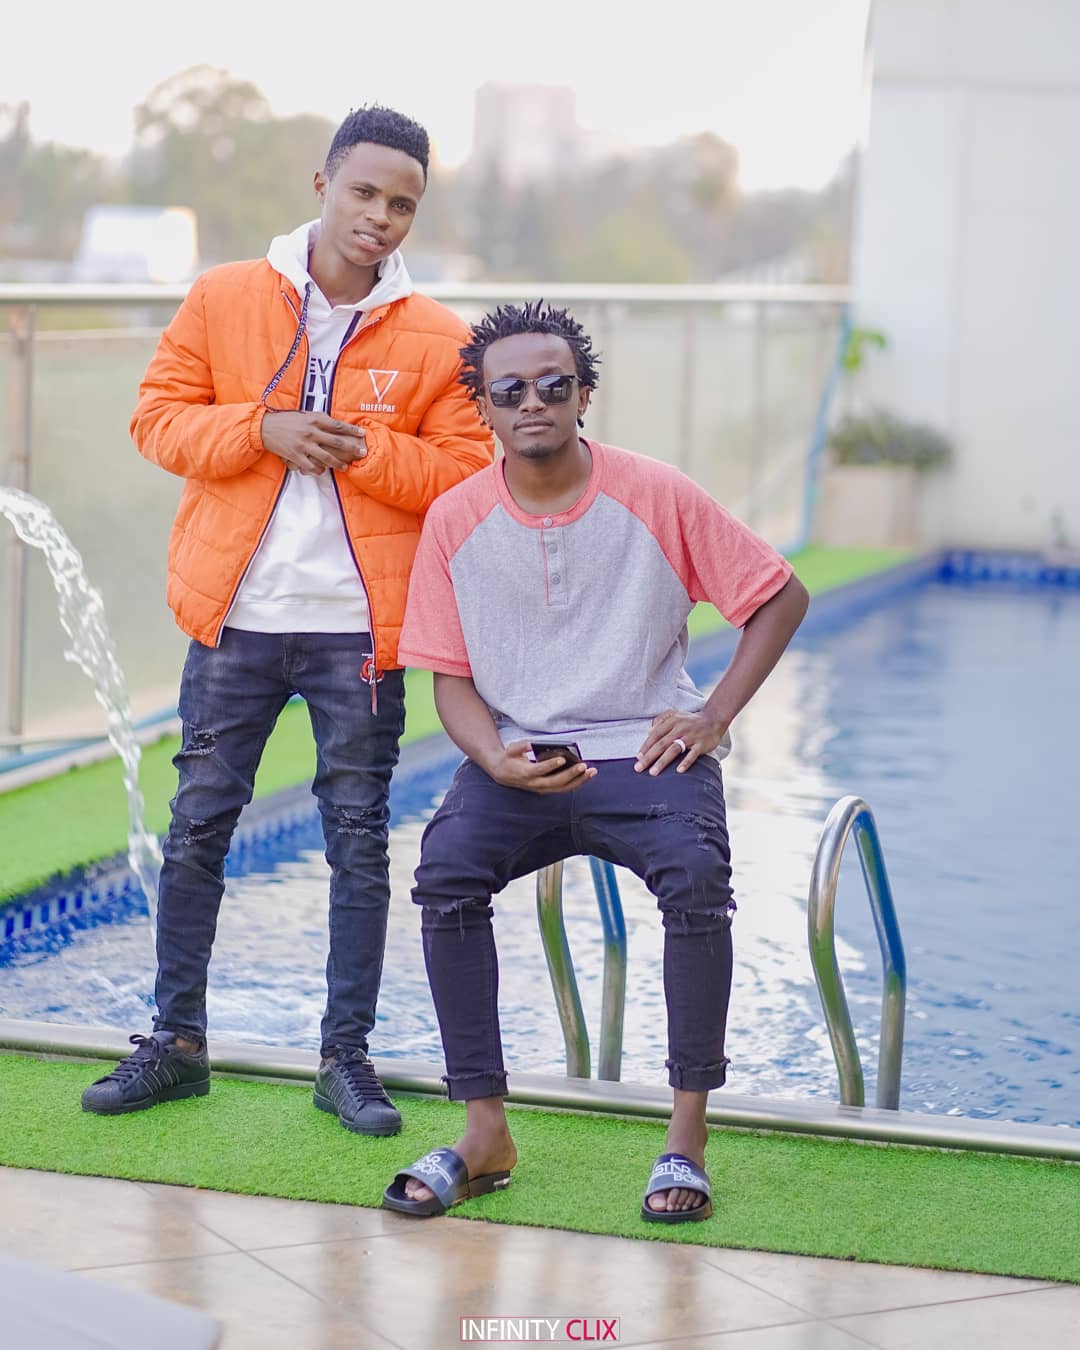 The little drama boy: Bahati’s lost objective in the gospel music industry